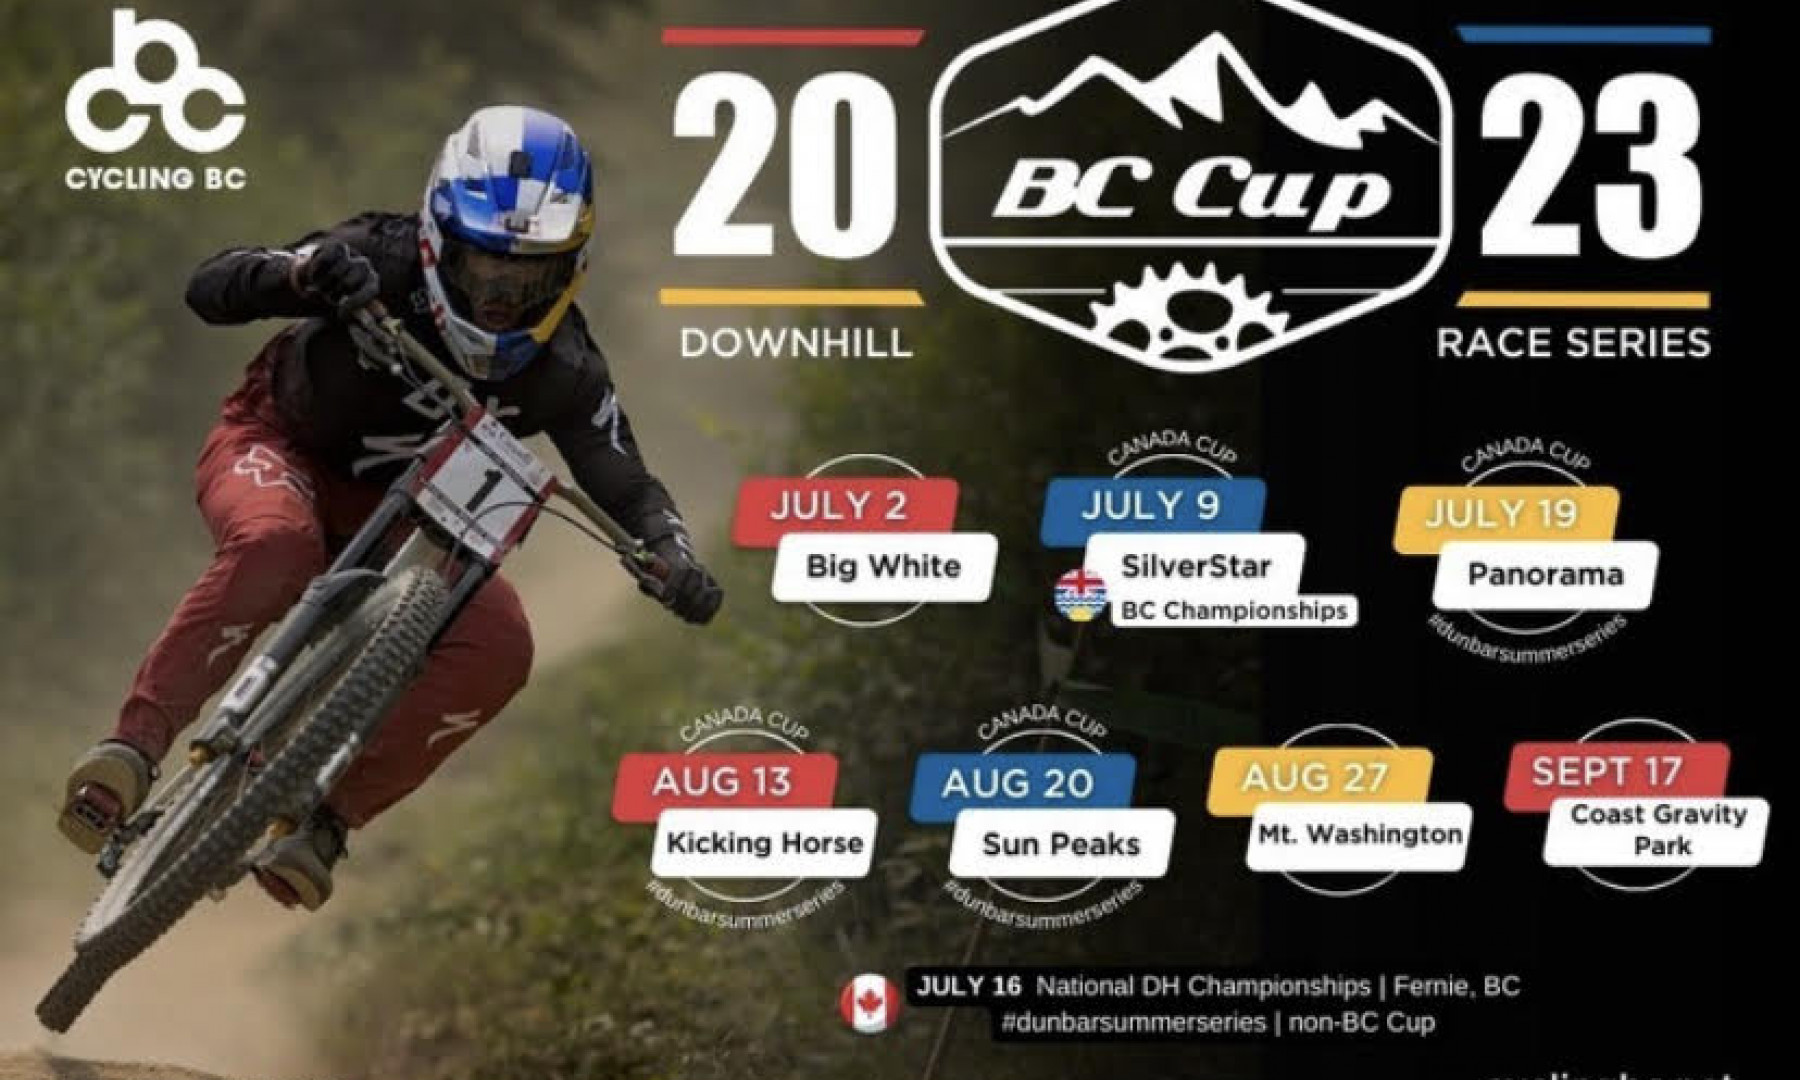 Canada Cup | BC Cup 2023